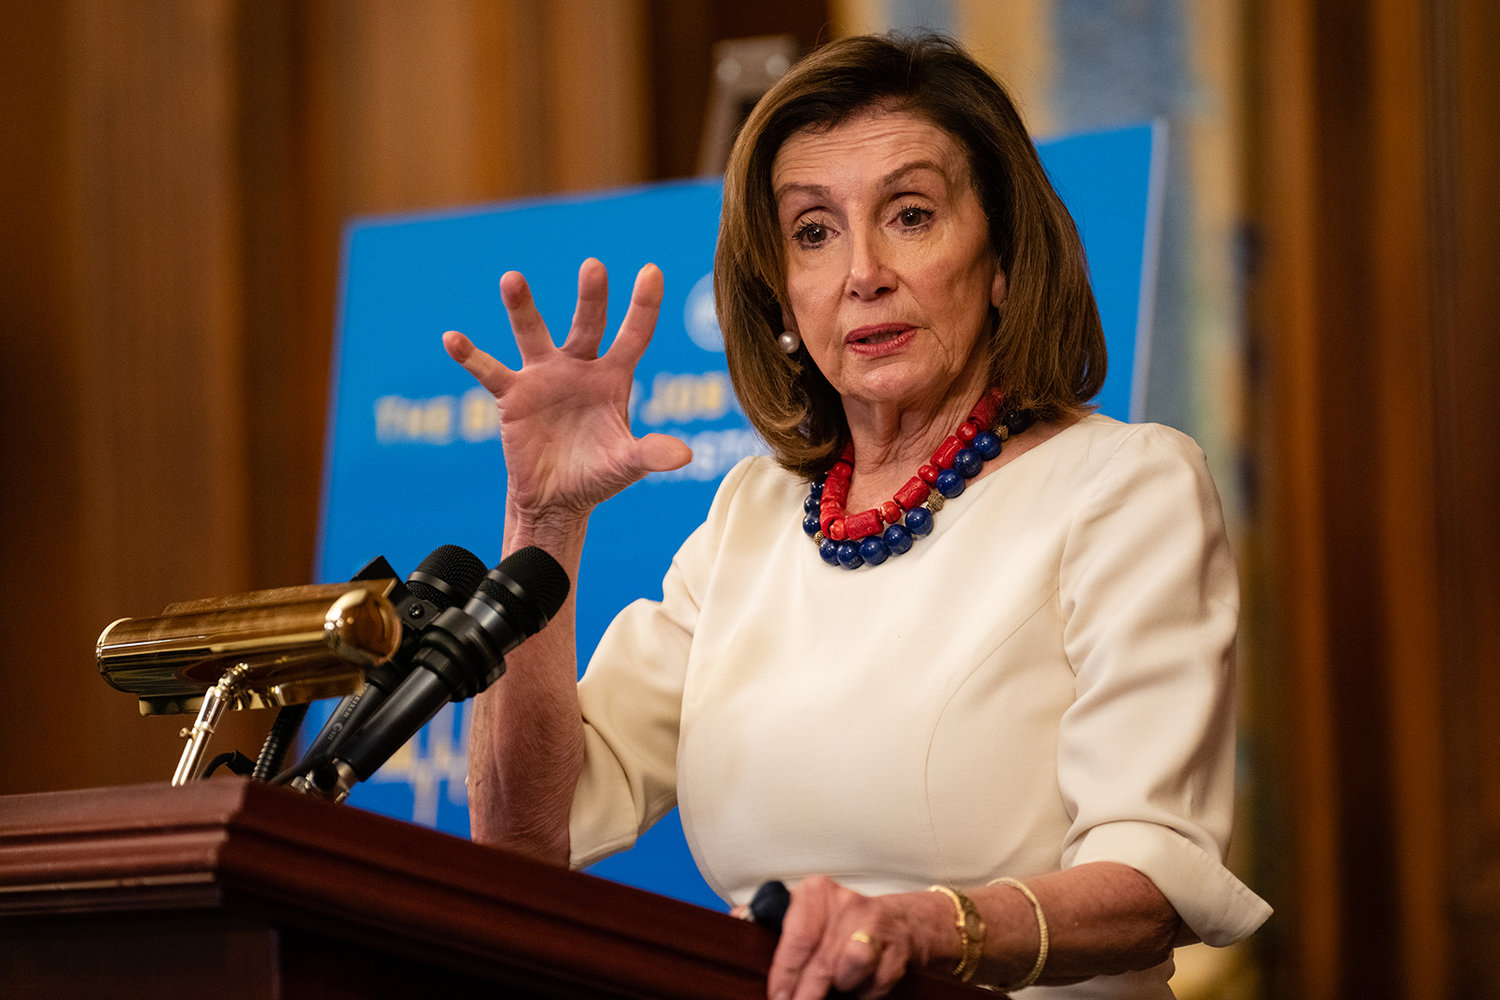 Speaker of the House Nancy Pelosi, D-Calif., talks to reporters during her weekly news conference on Capitol Hill on Jan. 20, 2022, in Washington, D.C. (Eric Lee/Pool/Getty Images/TNS)